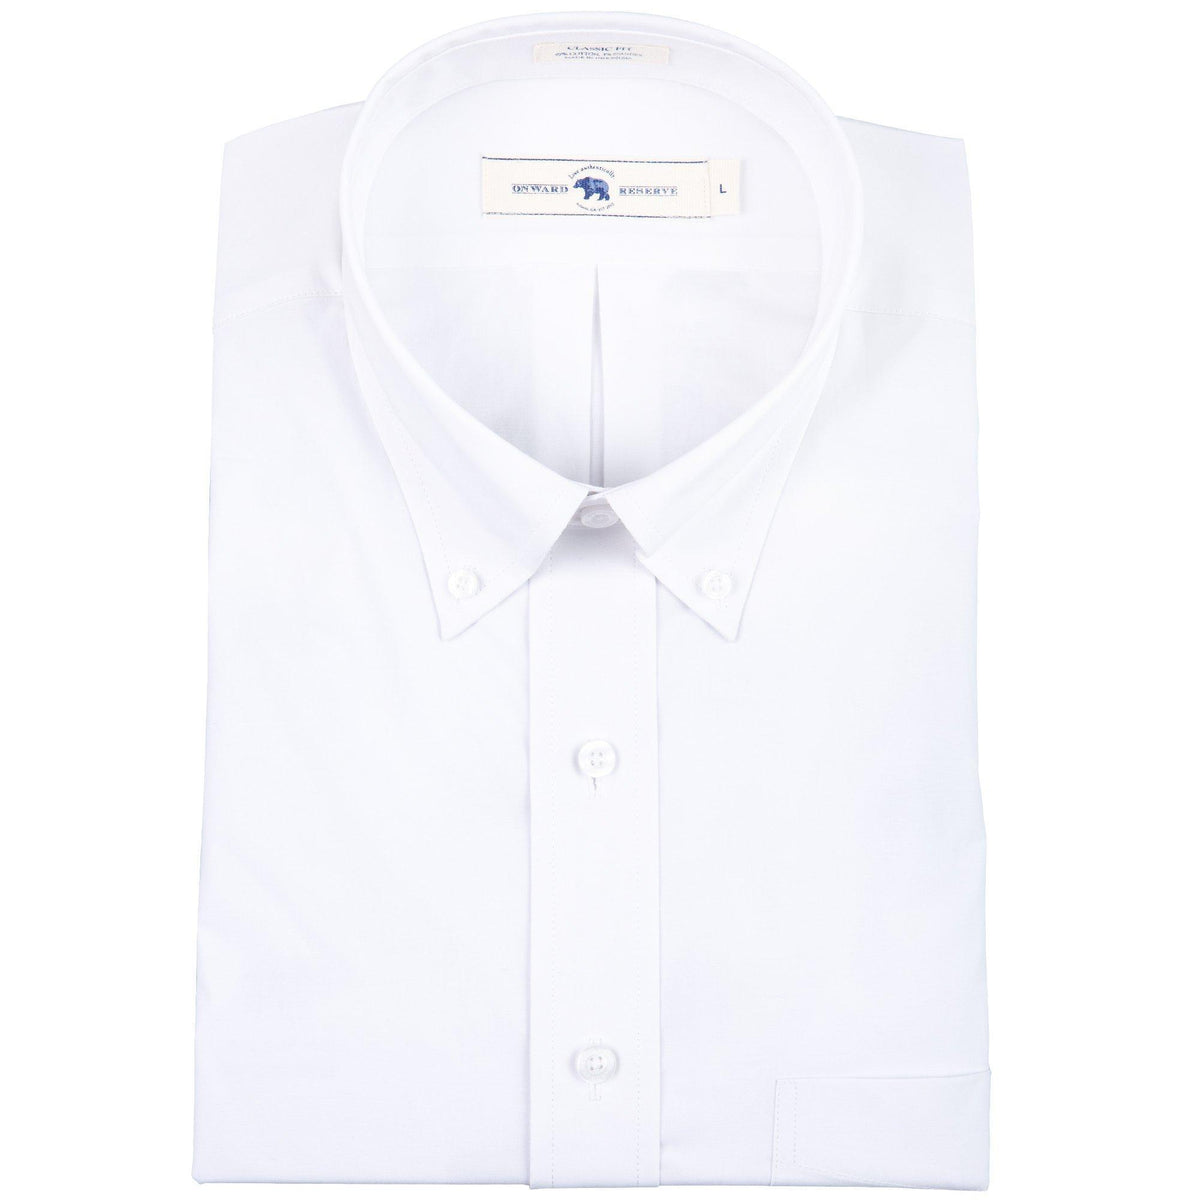 Onward Reserve Classic Fit Cotton Stretch Button Down - White